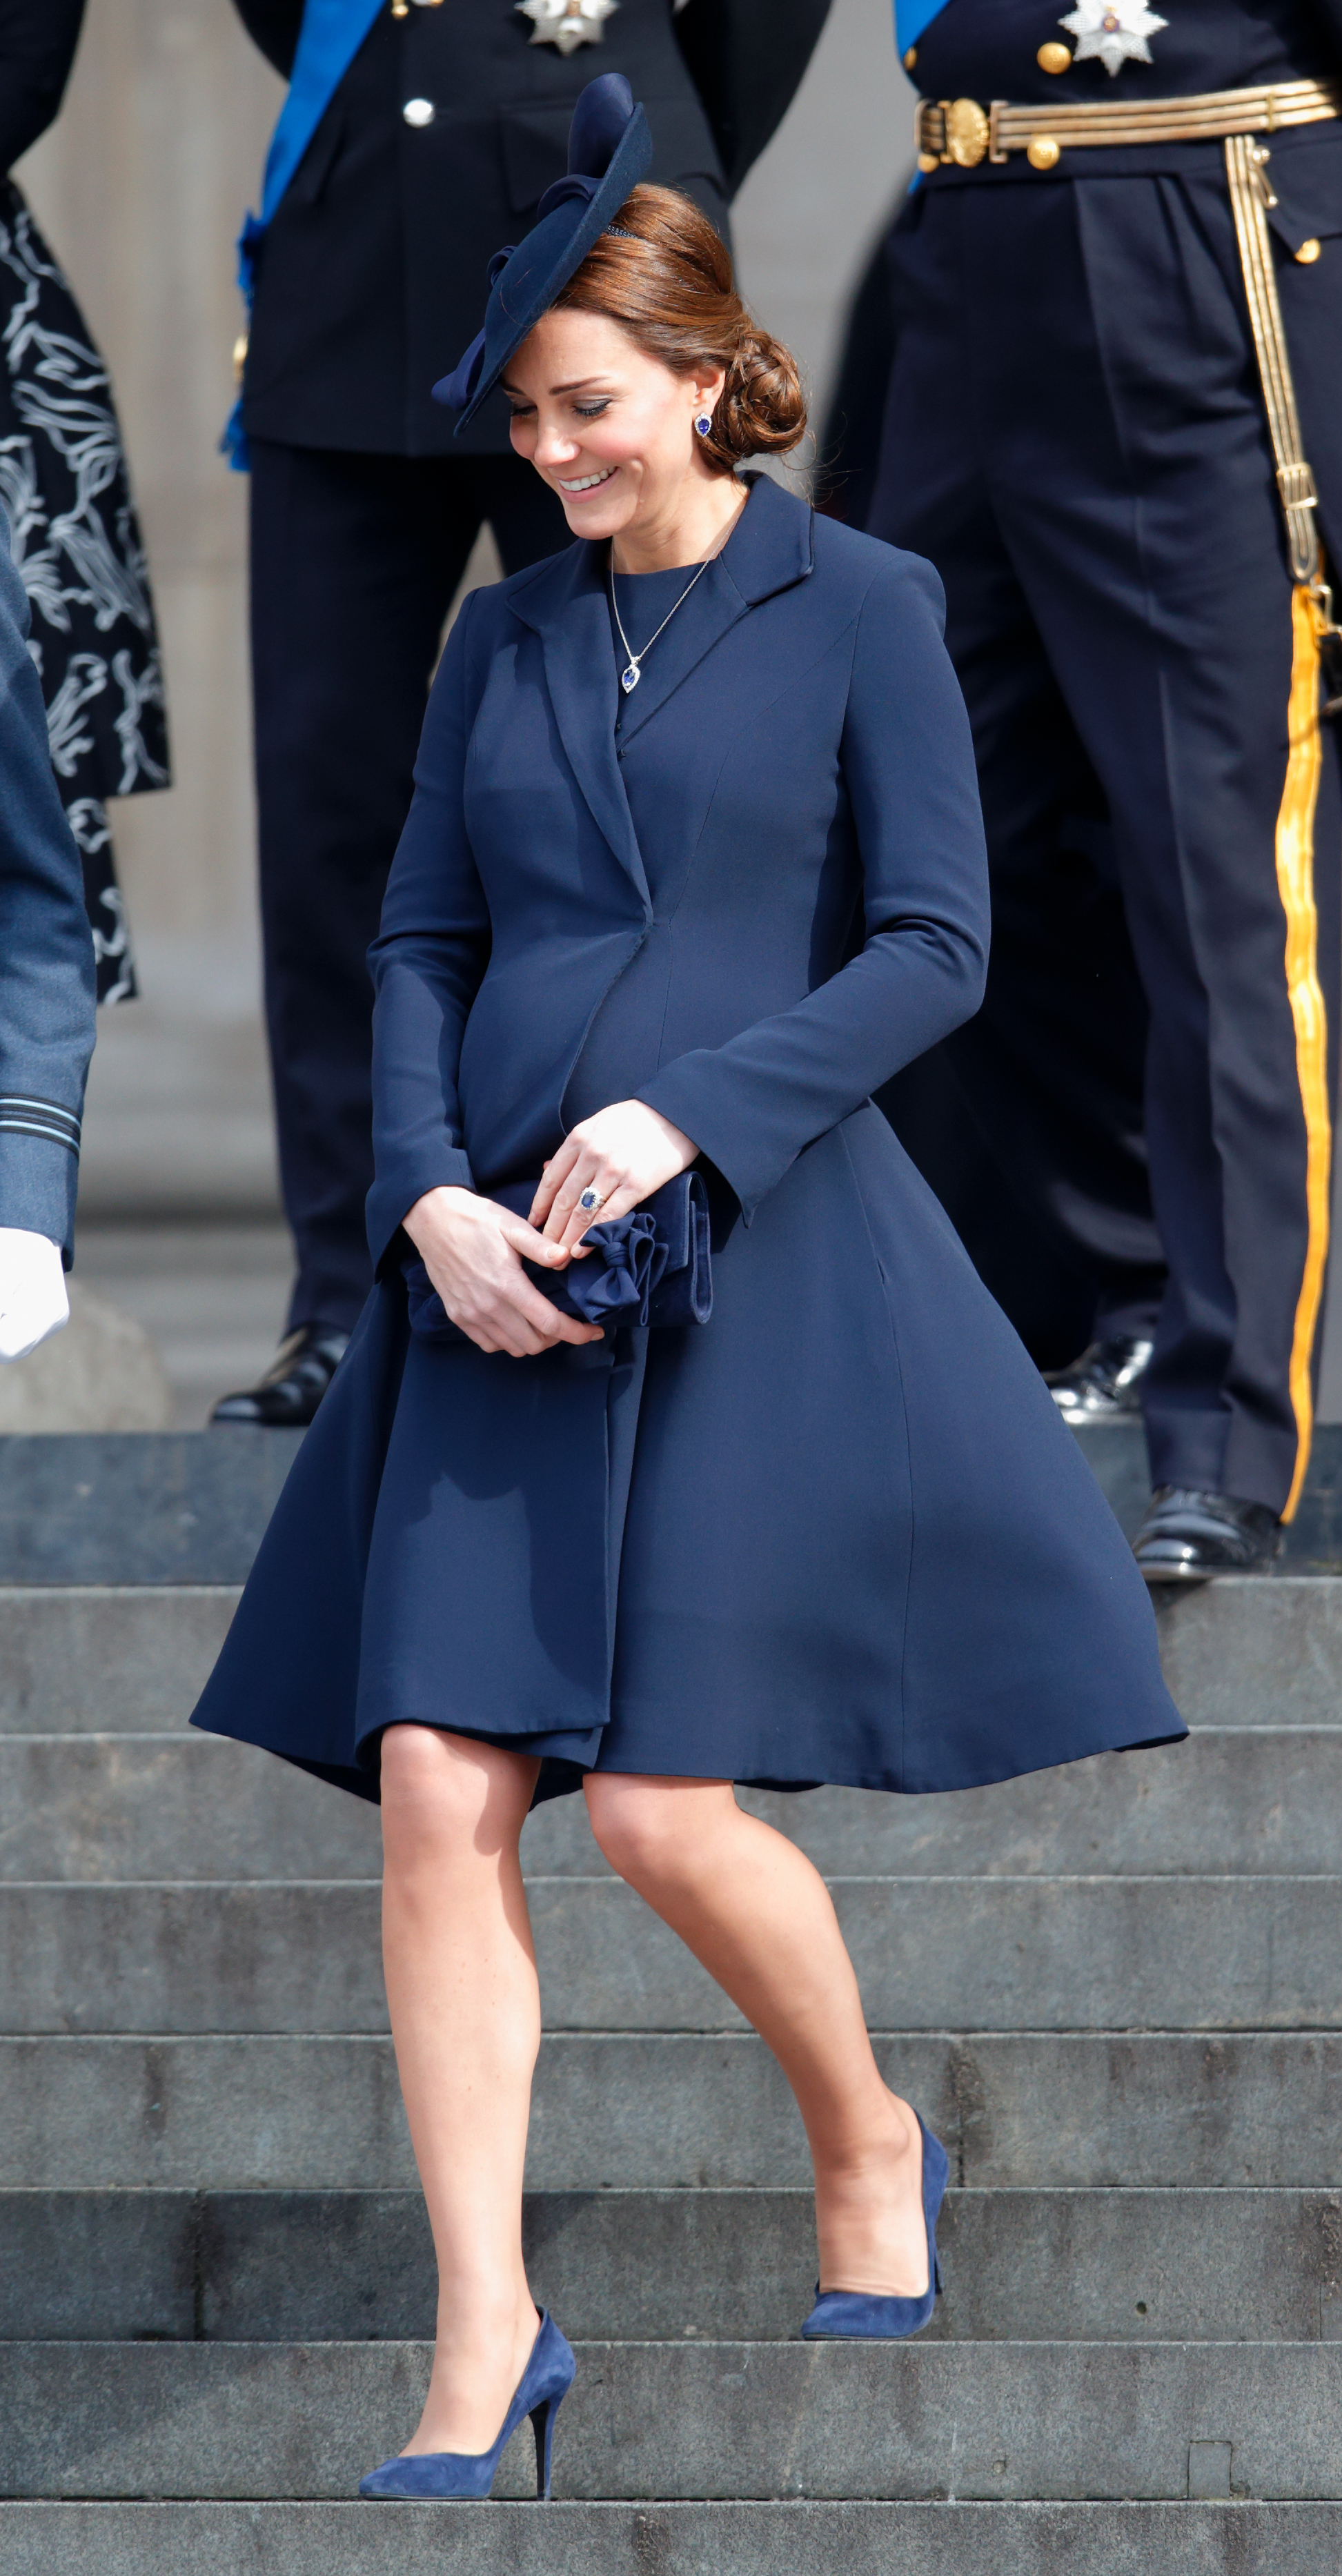 LONDON, UNITED KINGDOM - MARCH 13: (EMBARGOED FOR PUBLICATION IN UK NEWSPAPERS UNTIL 48 HOURS AFTER CREATE DATE AND TIME) Catherine, Duchess of Cambridge attends a Service of Commemoration to mark the end of combat operations in Afghanistan at St Paul's Cathedral on March 13, 2015 in London, England. (Photo by Max Mumby/Indigo/Getty Images)